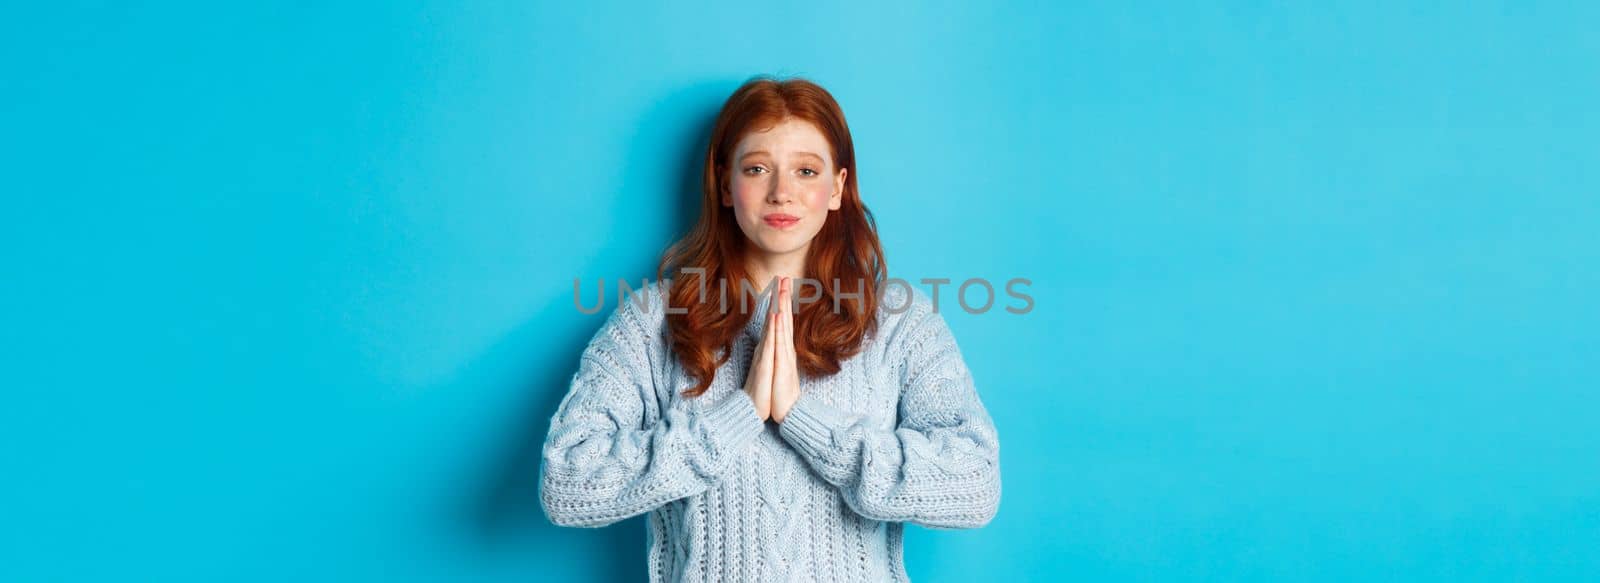 Cute teenage redhead girl asking for help, smiling while begging for favour, need something, standing over blue background.